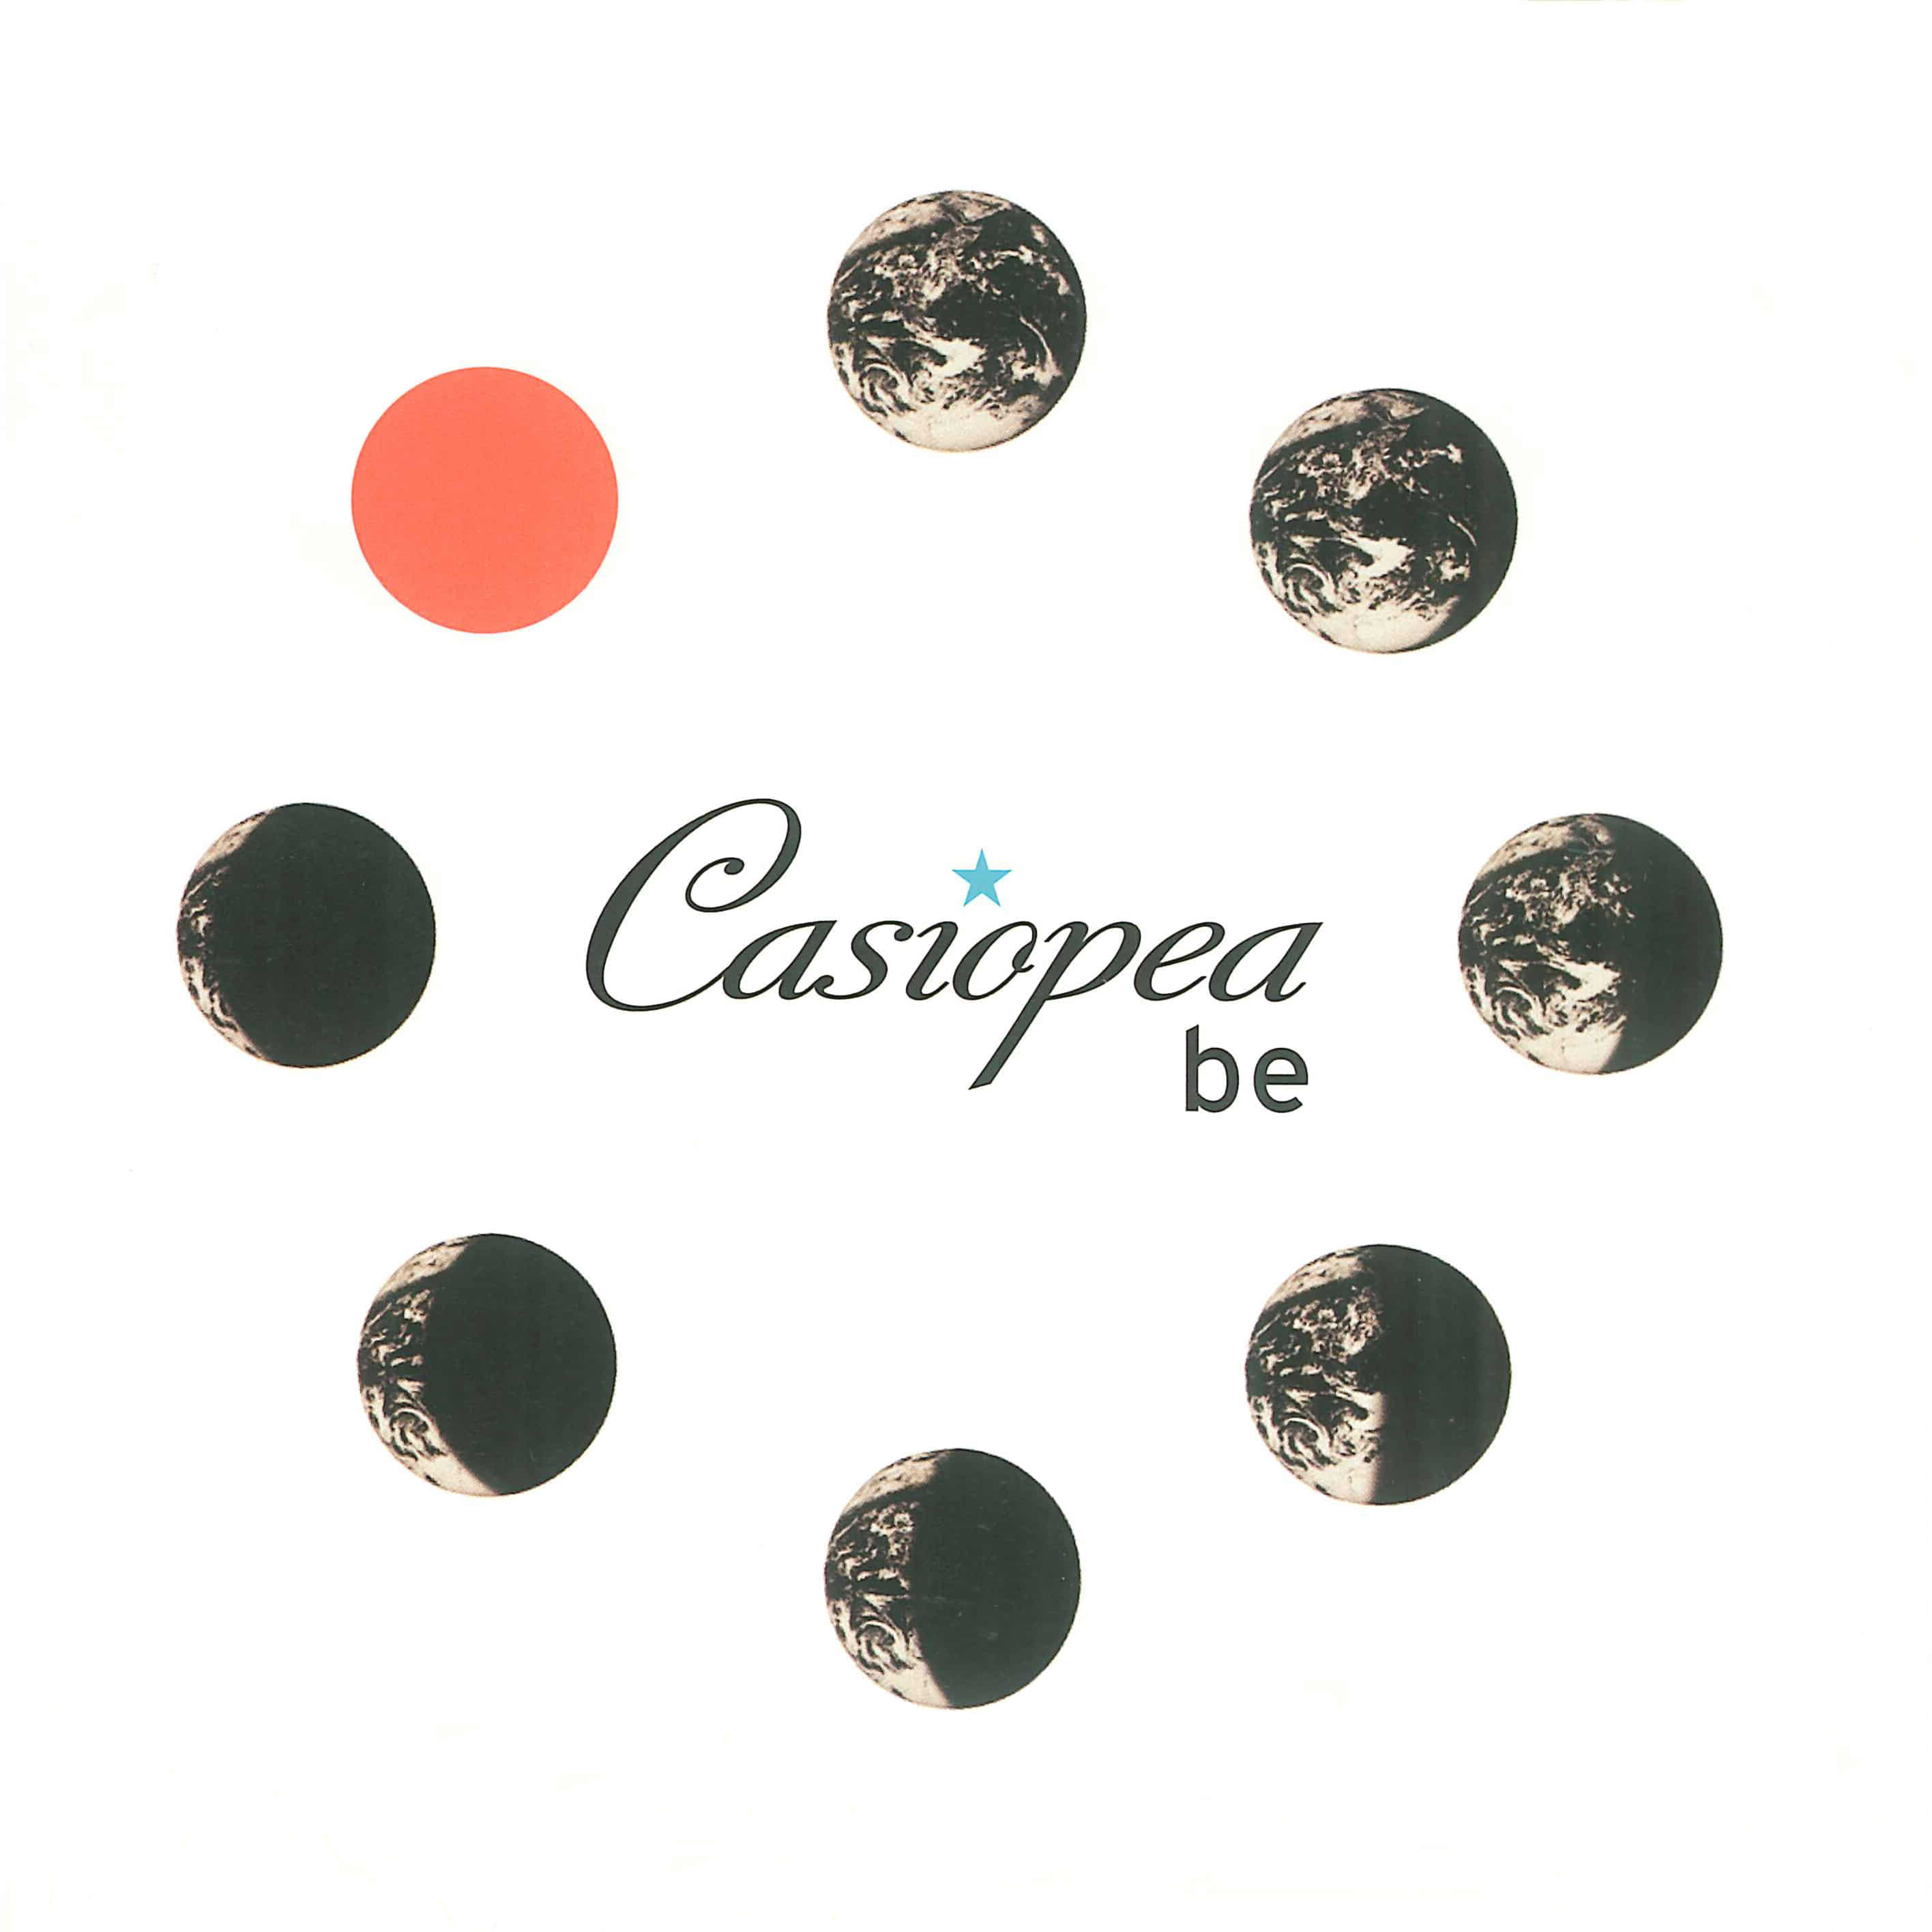 Casiopea-THIRD POSSIBILITY